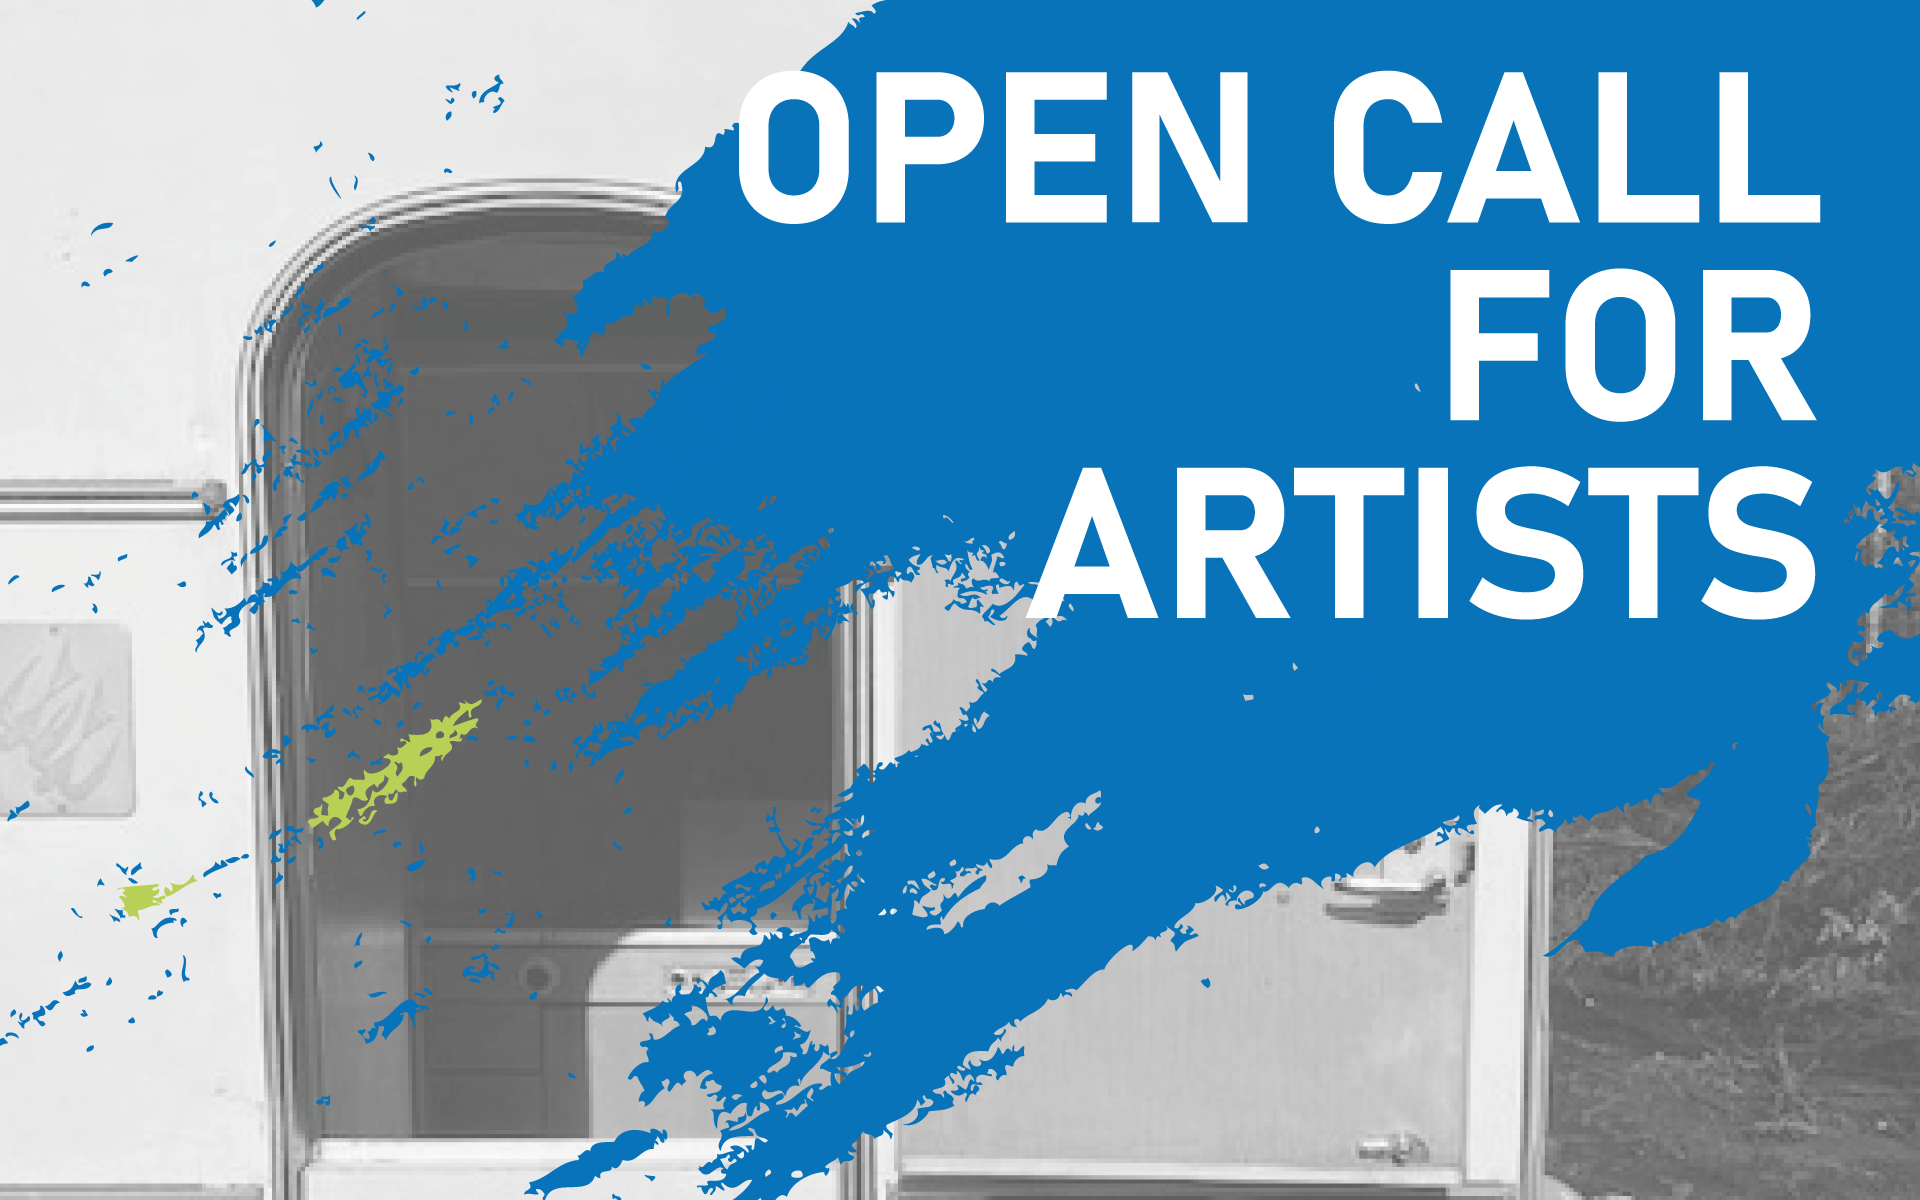 OPEN CALL FOR ARTISTS